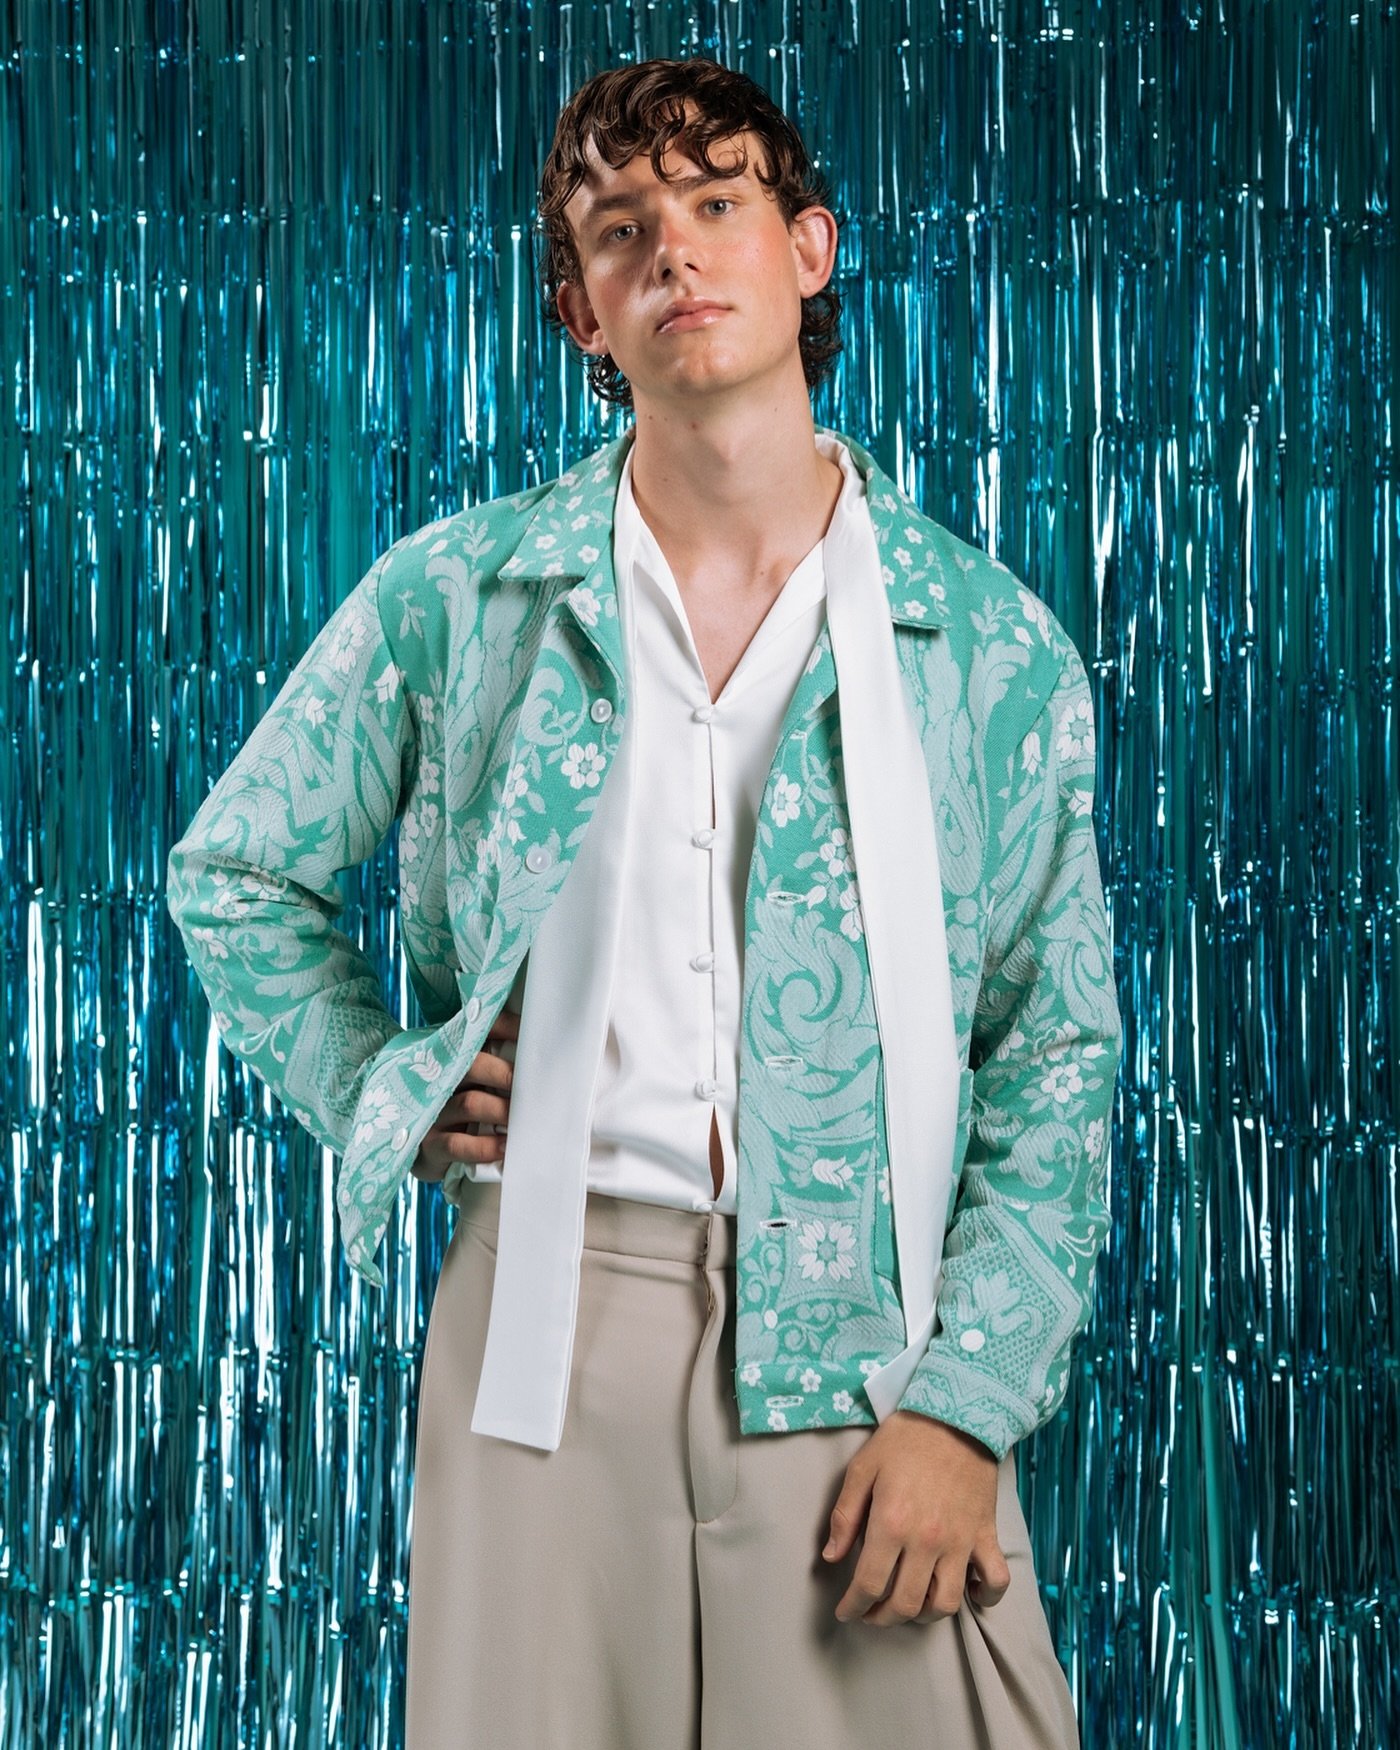 💘🎈🎉🪩🍸 R.S.V.P. Is for every guest at the party. Whether you&rsquo;re the guest of honour or just giving main character energy we have you covered.

David wears our gorgeous new one-of-a-kind repurposed ♻️ 🌎 &lsquo;Munro&rsquo; jacket - availabl